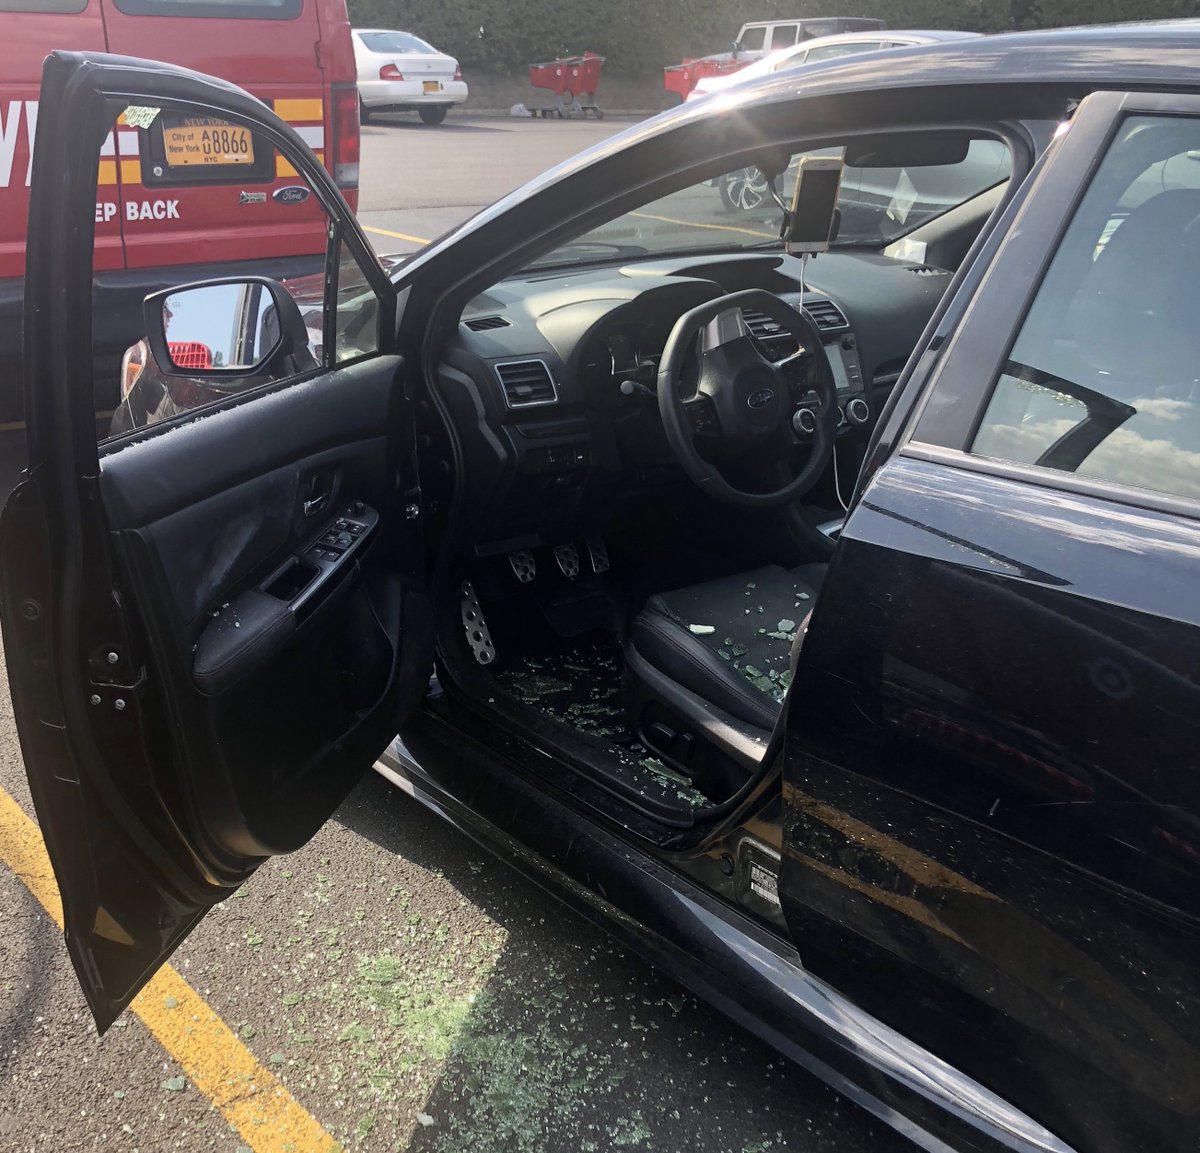 A car window in Queens, New York on Thursday, Aug. 8, 2019 broken in an effort to save a four-year-old boy from the overheating vehicle. (Courtesy of FDNY via Twitter)